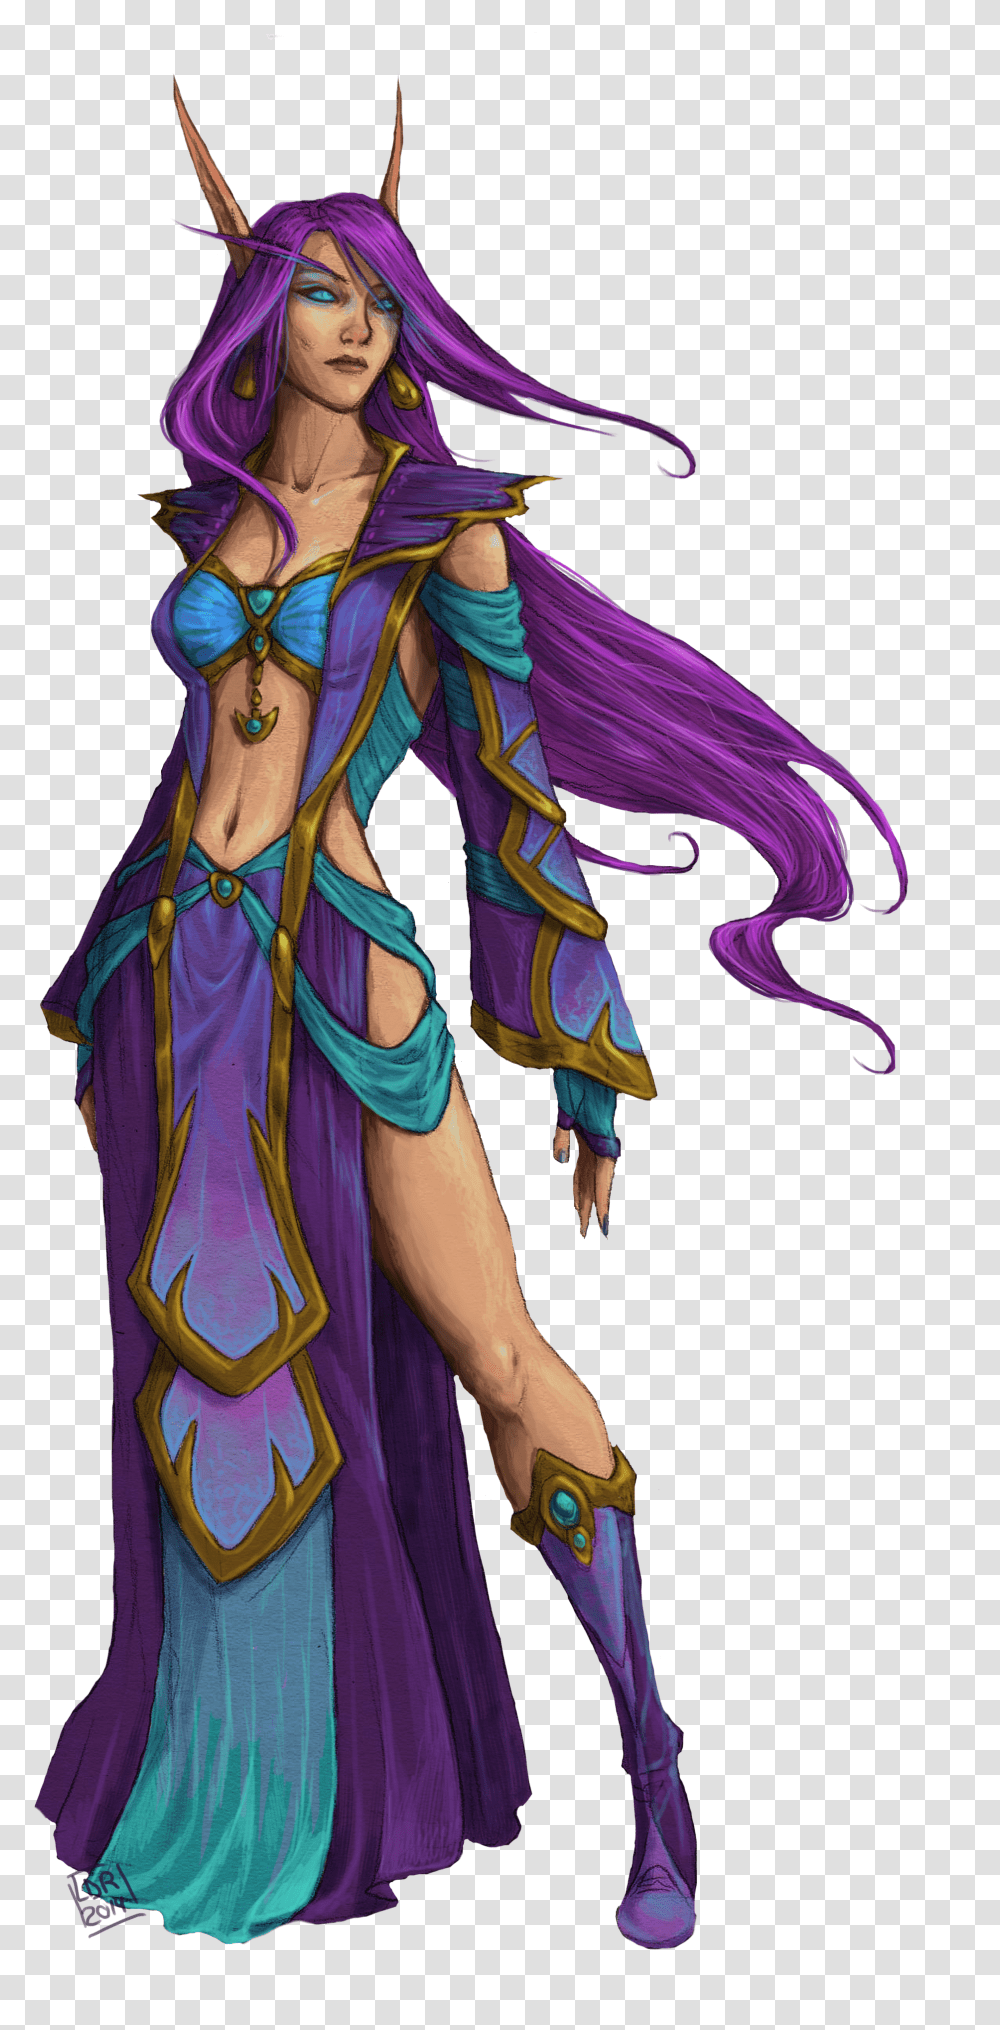 Wow Female Mage Mage Costumes For Women Transparent Png